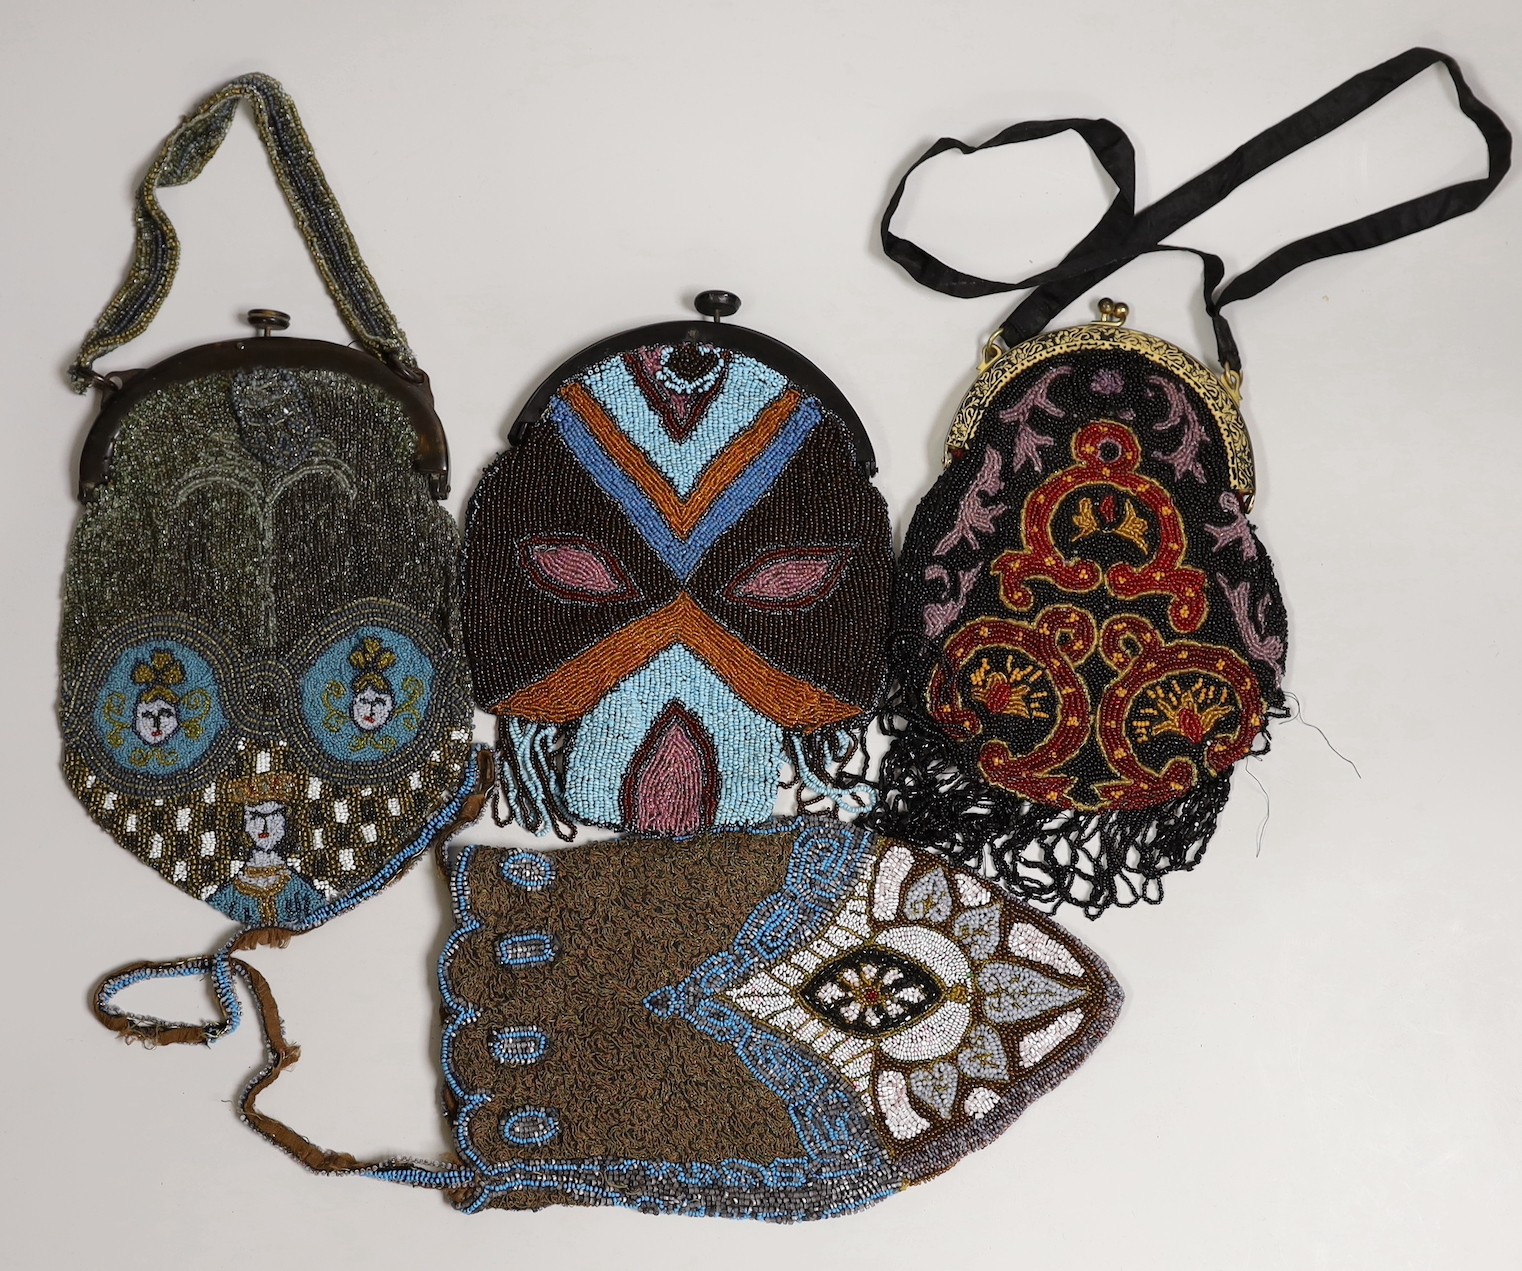 Two Edwardian bead worked bags and two later 1920’s beaded bags with Bakelite frames(4). - Image 2 of 2